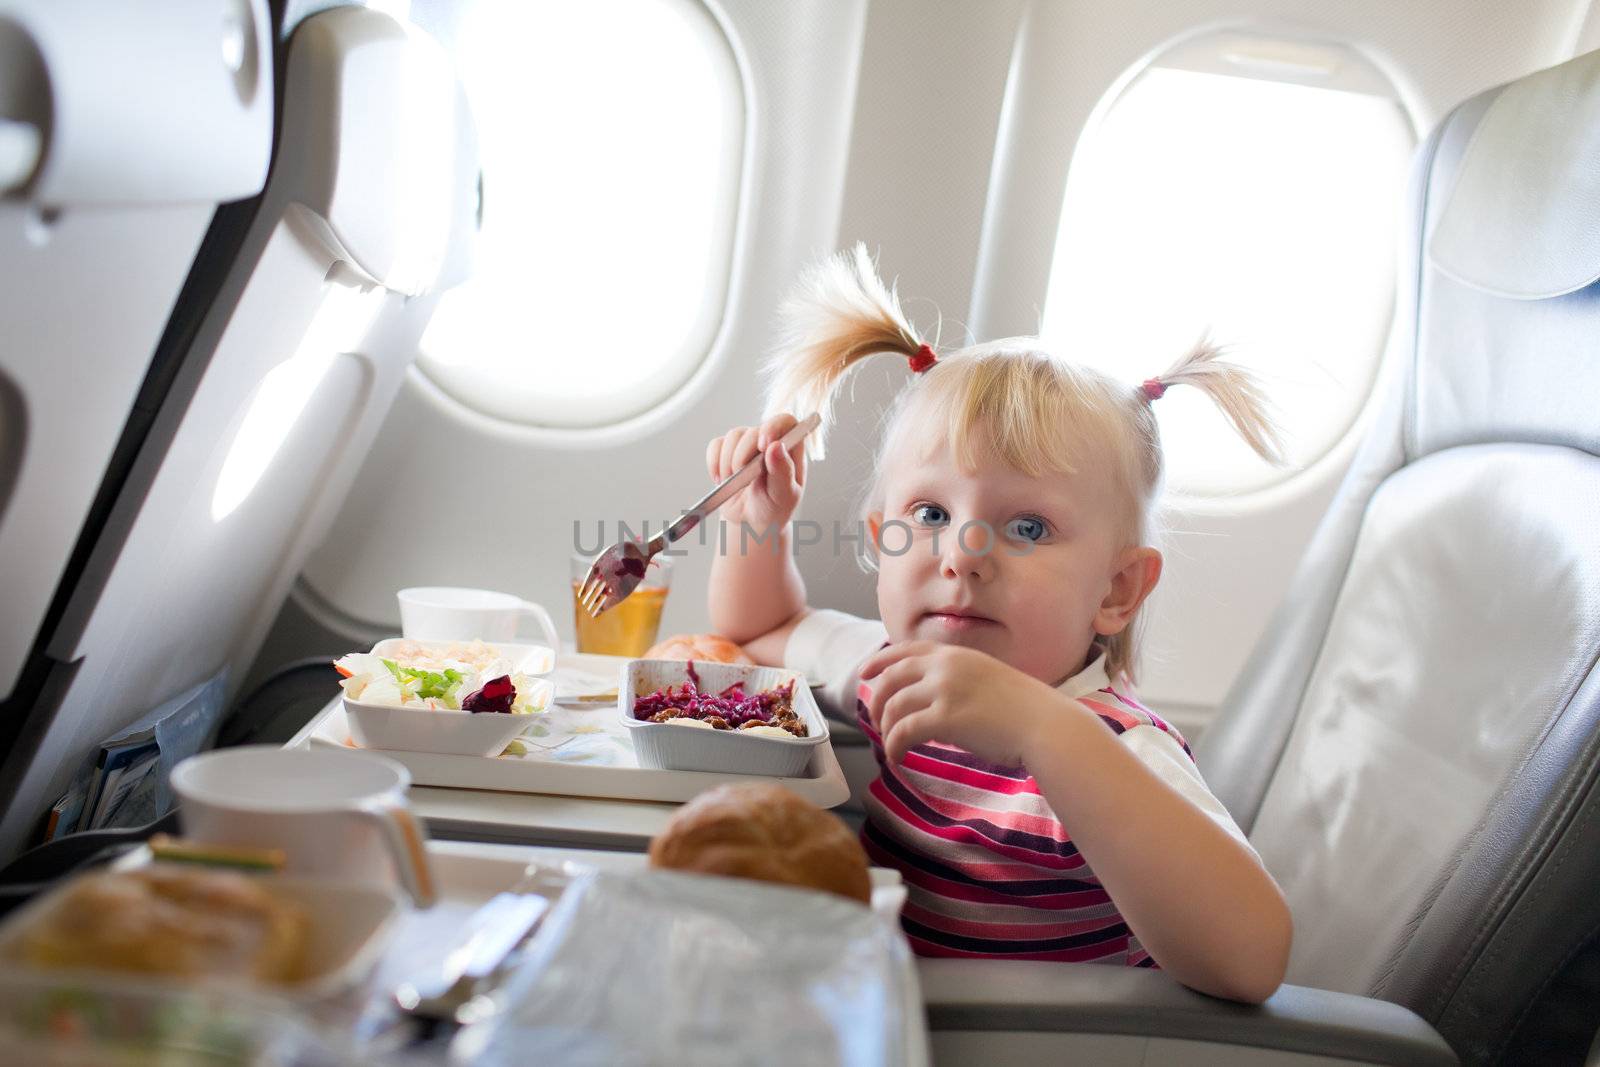 girl eating in the airplane by vsurkov